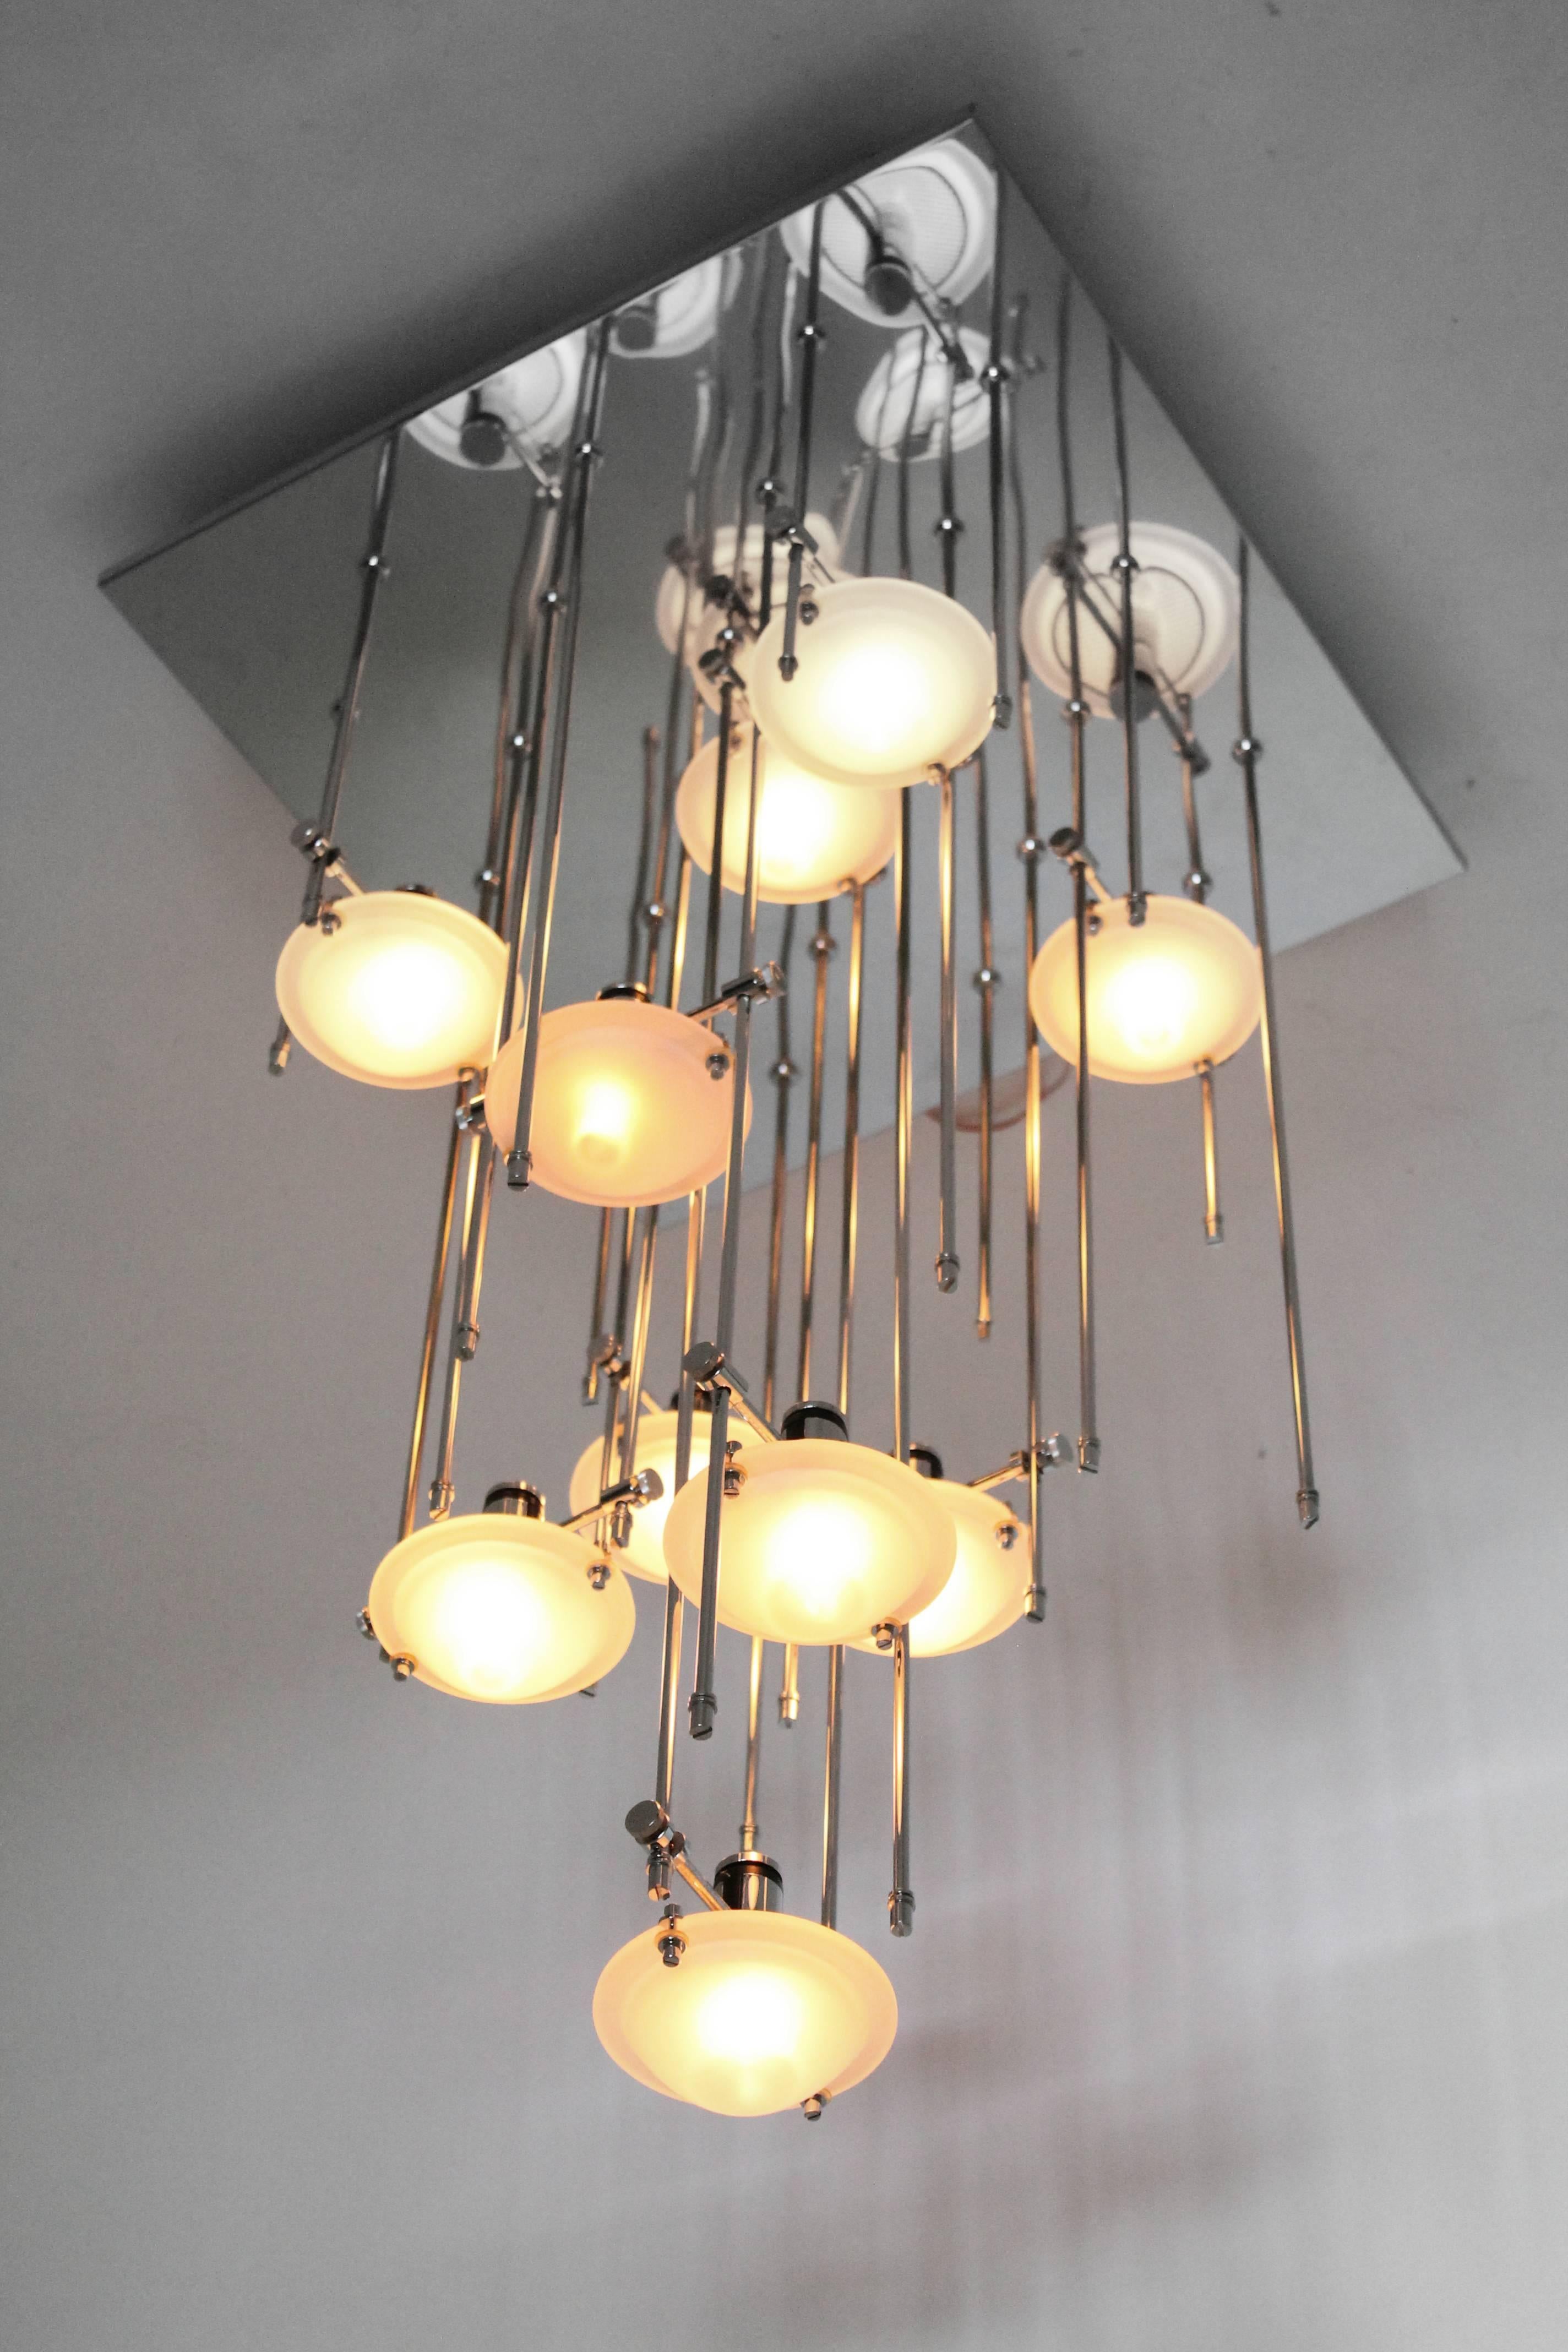 Interactive flush mount chandelier  by Lightolier. Get creative by selecting which length of rods goes where and at what height to put the thick opale Murano glass shade. 

The deep highly reflective chrome  plate multiply the number of perceived